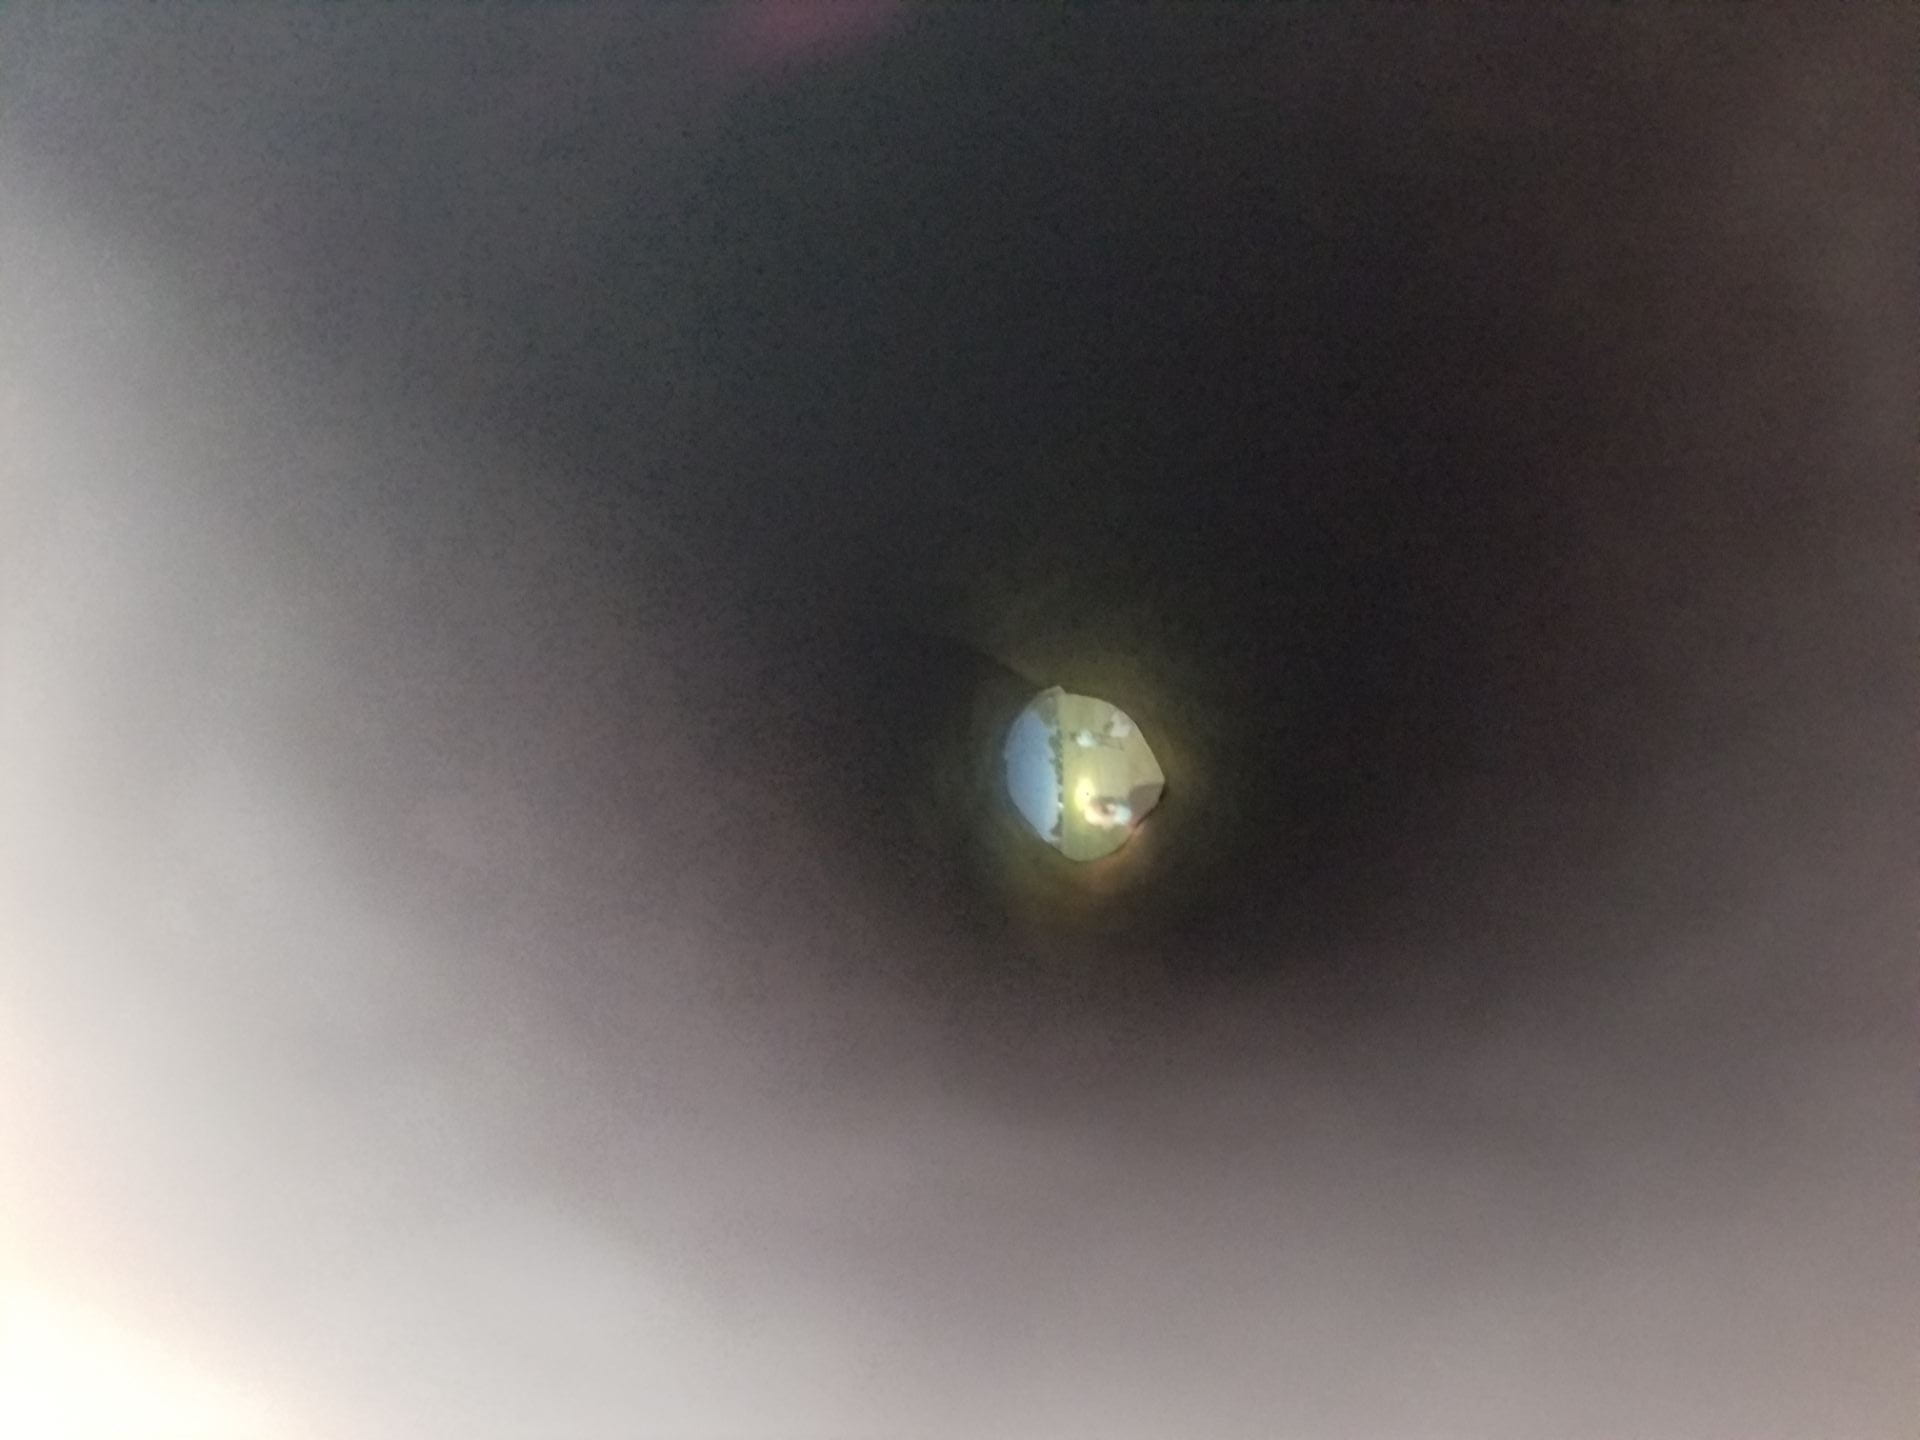 looking through the tube at the projected image